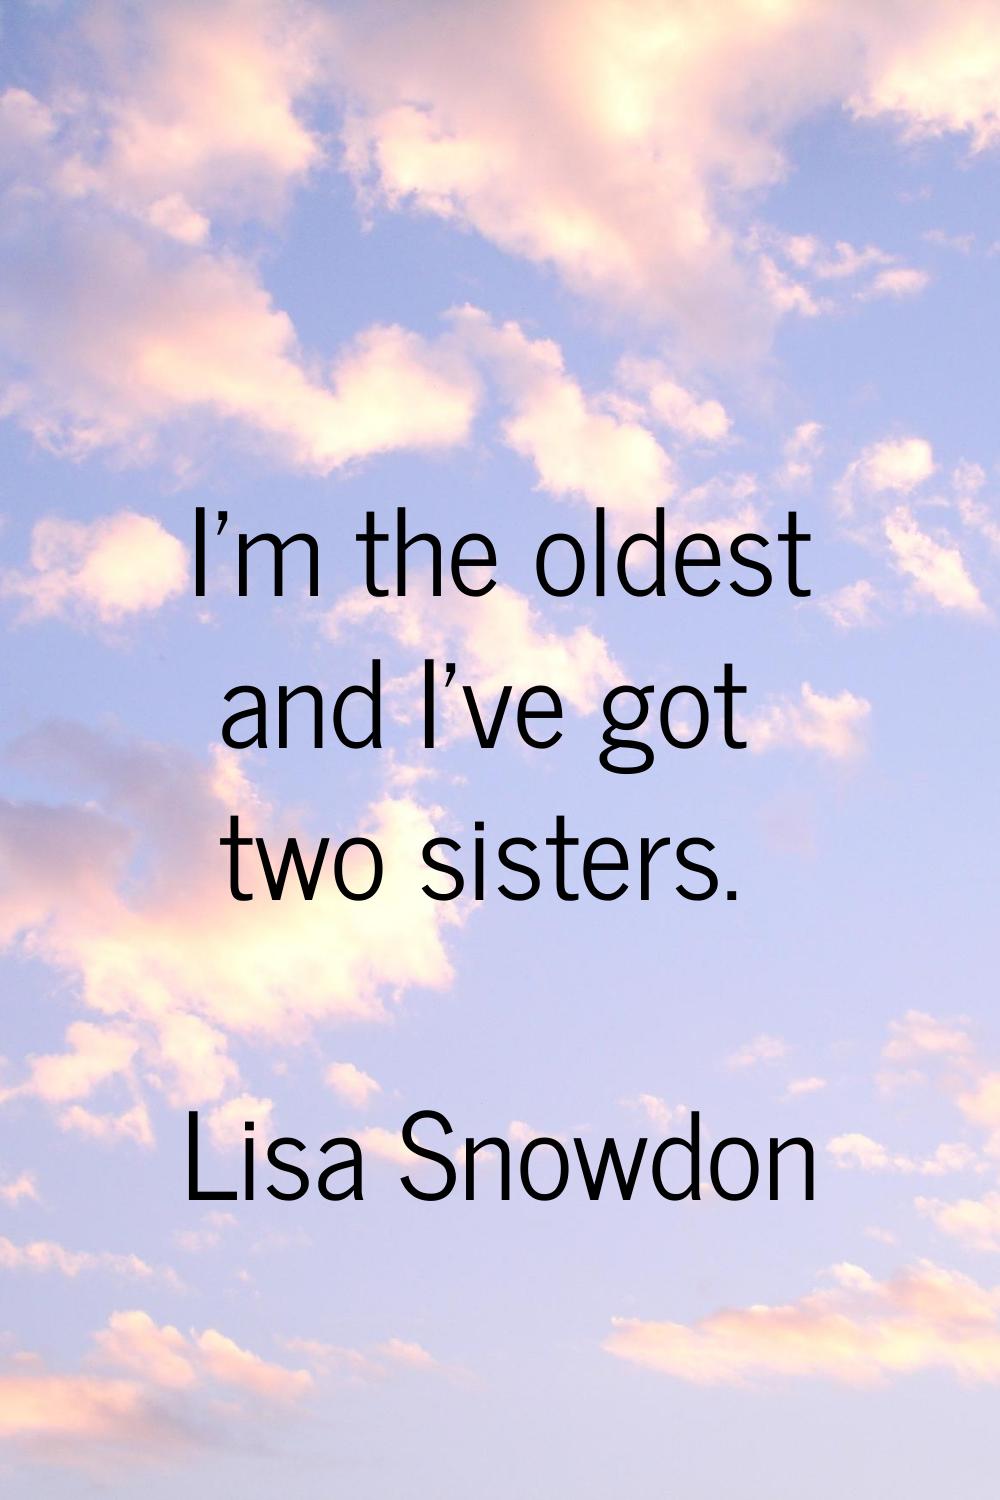 I'm the oldest and I've got two sisters.